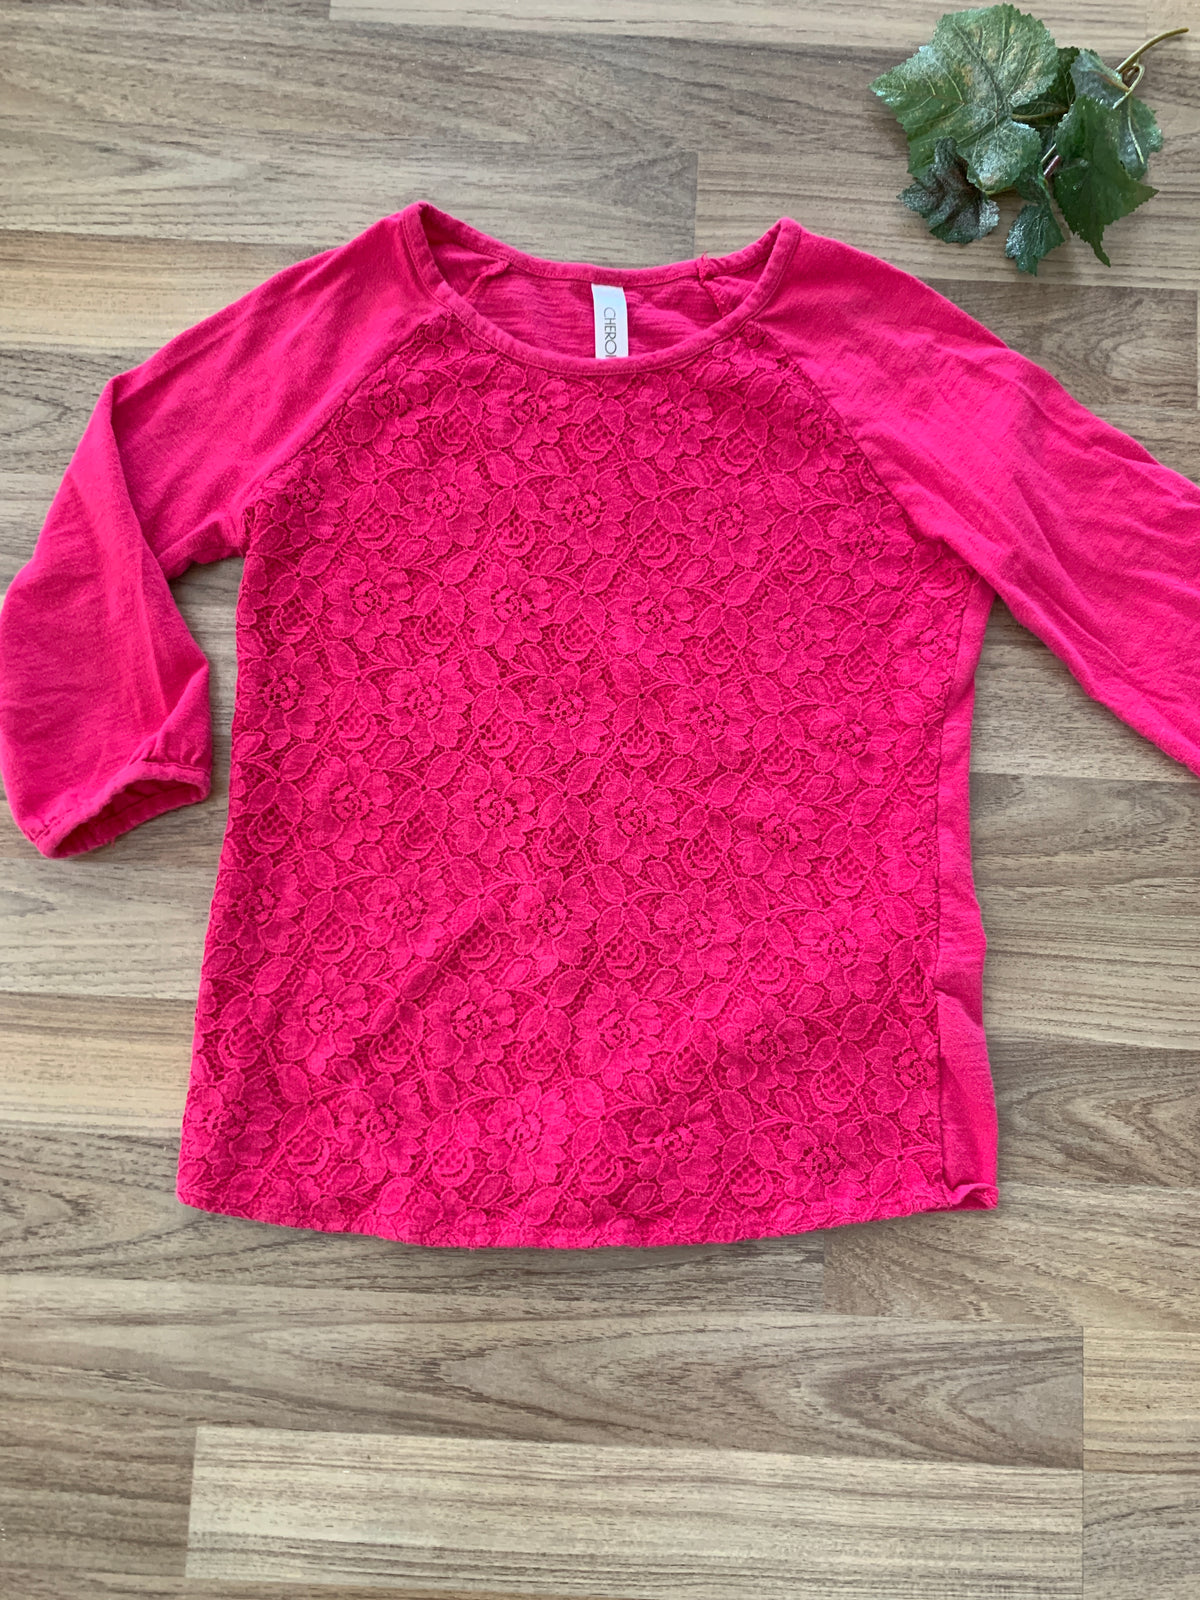 Top (Girls Size 10-12)